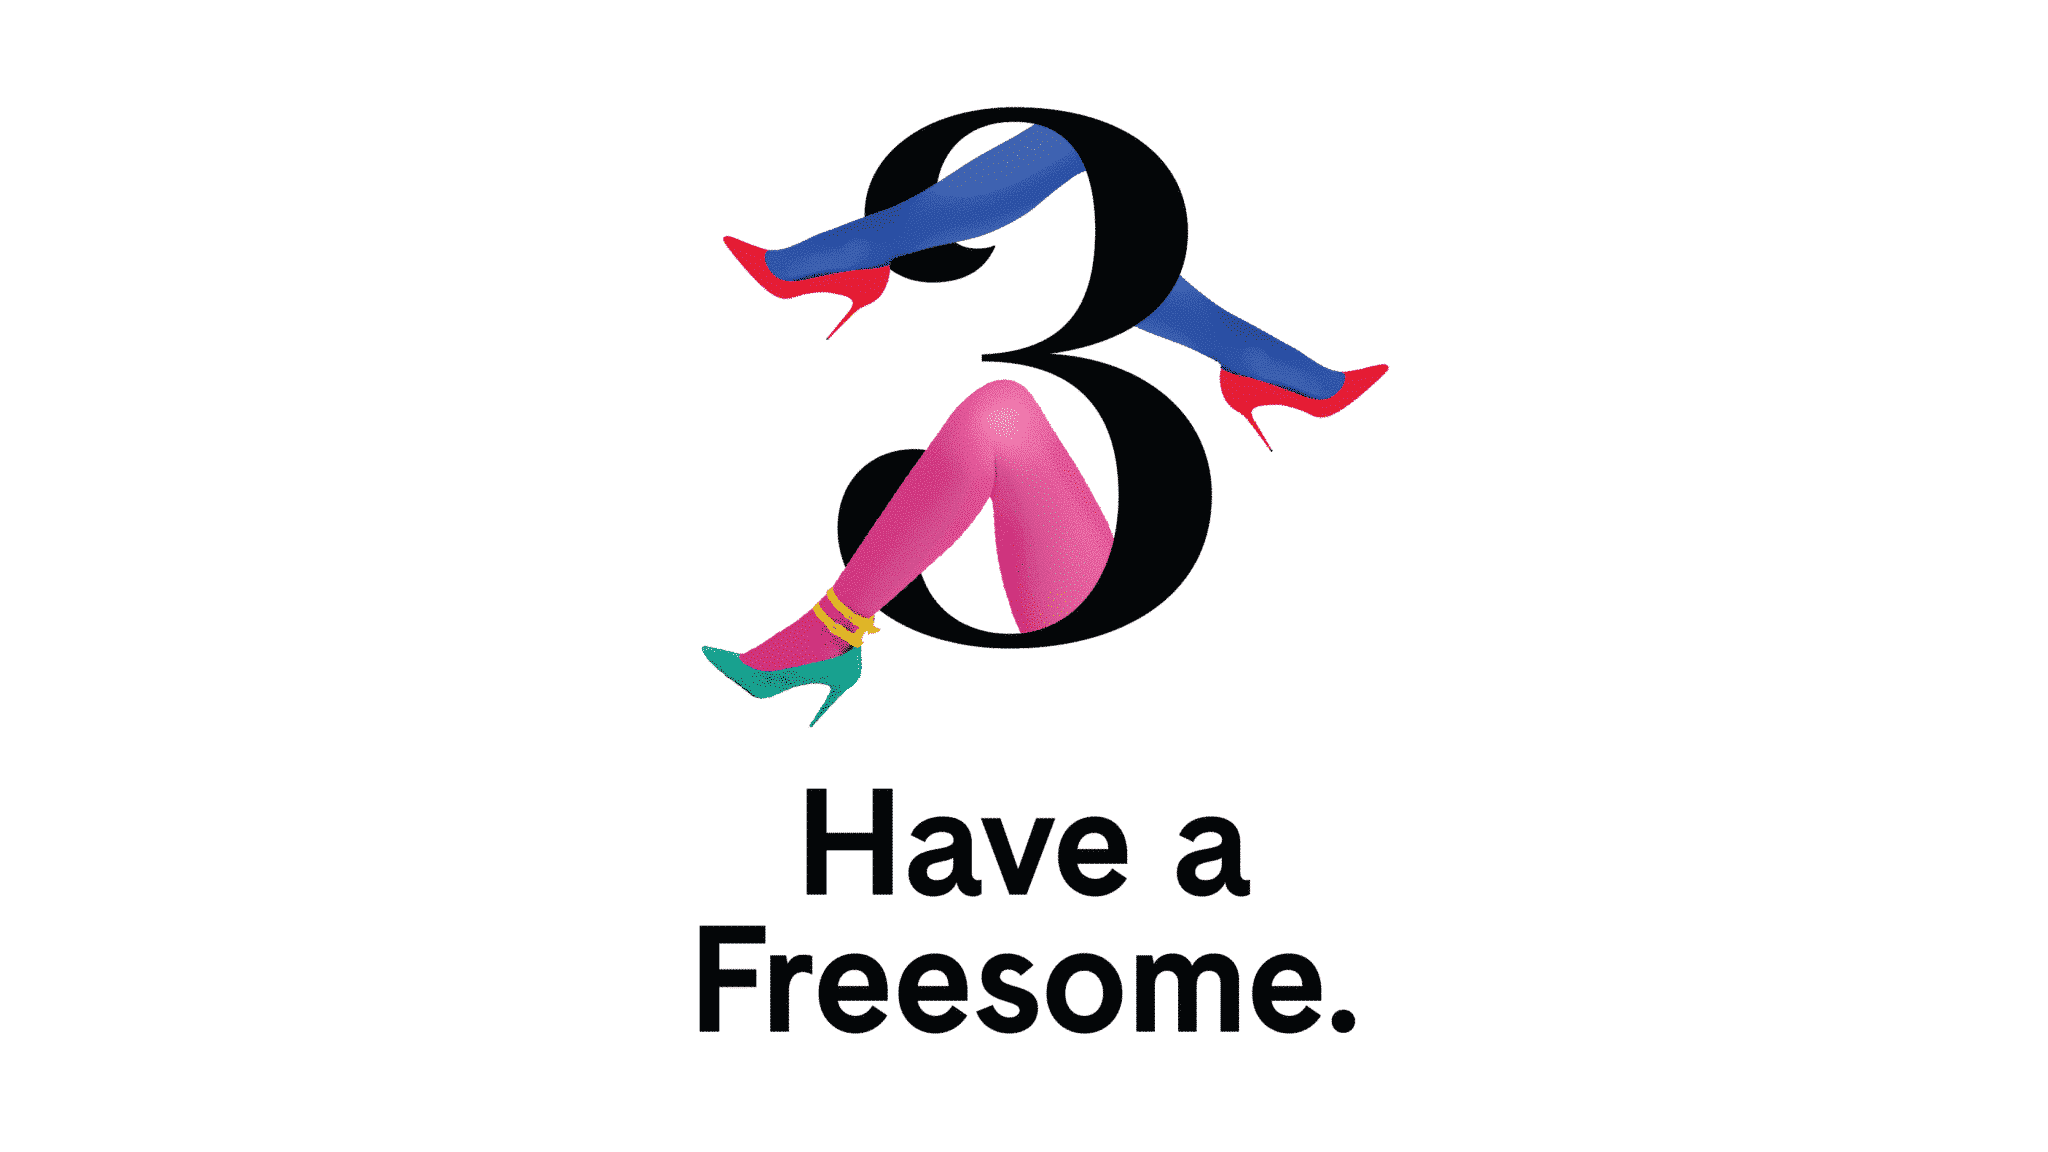 Freesome Campaign offer page